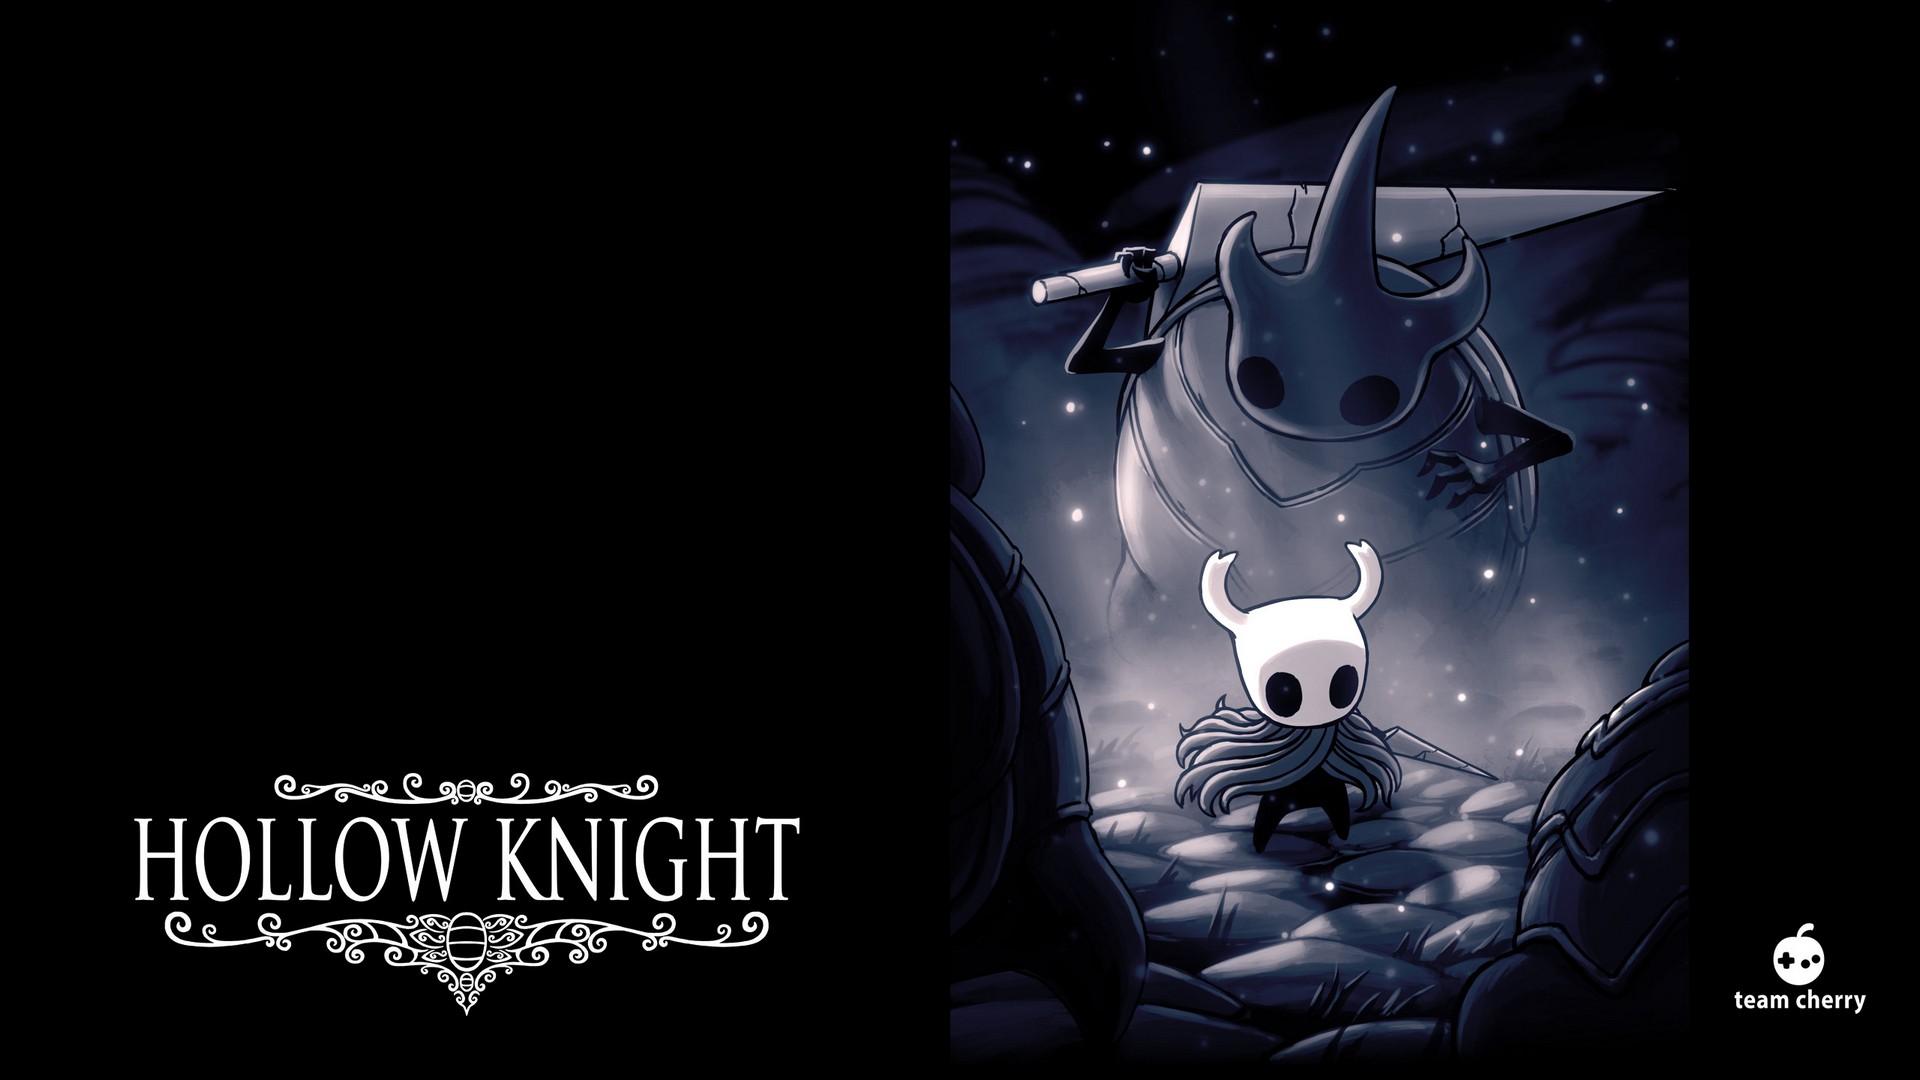 Wallpaper Hollow Knight Game Desktop with high-resolution 1920x1080 pixel. You can use this wallpaper for your Desktop Computer Backgrounds, Mac Wallpapers, Android Lock screen or iPhone Screensavers and another smartphone device